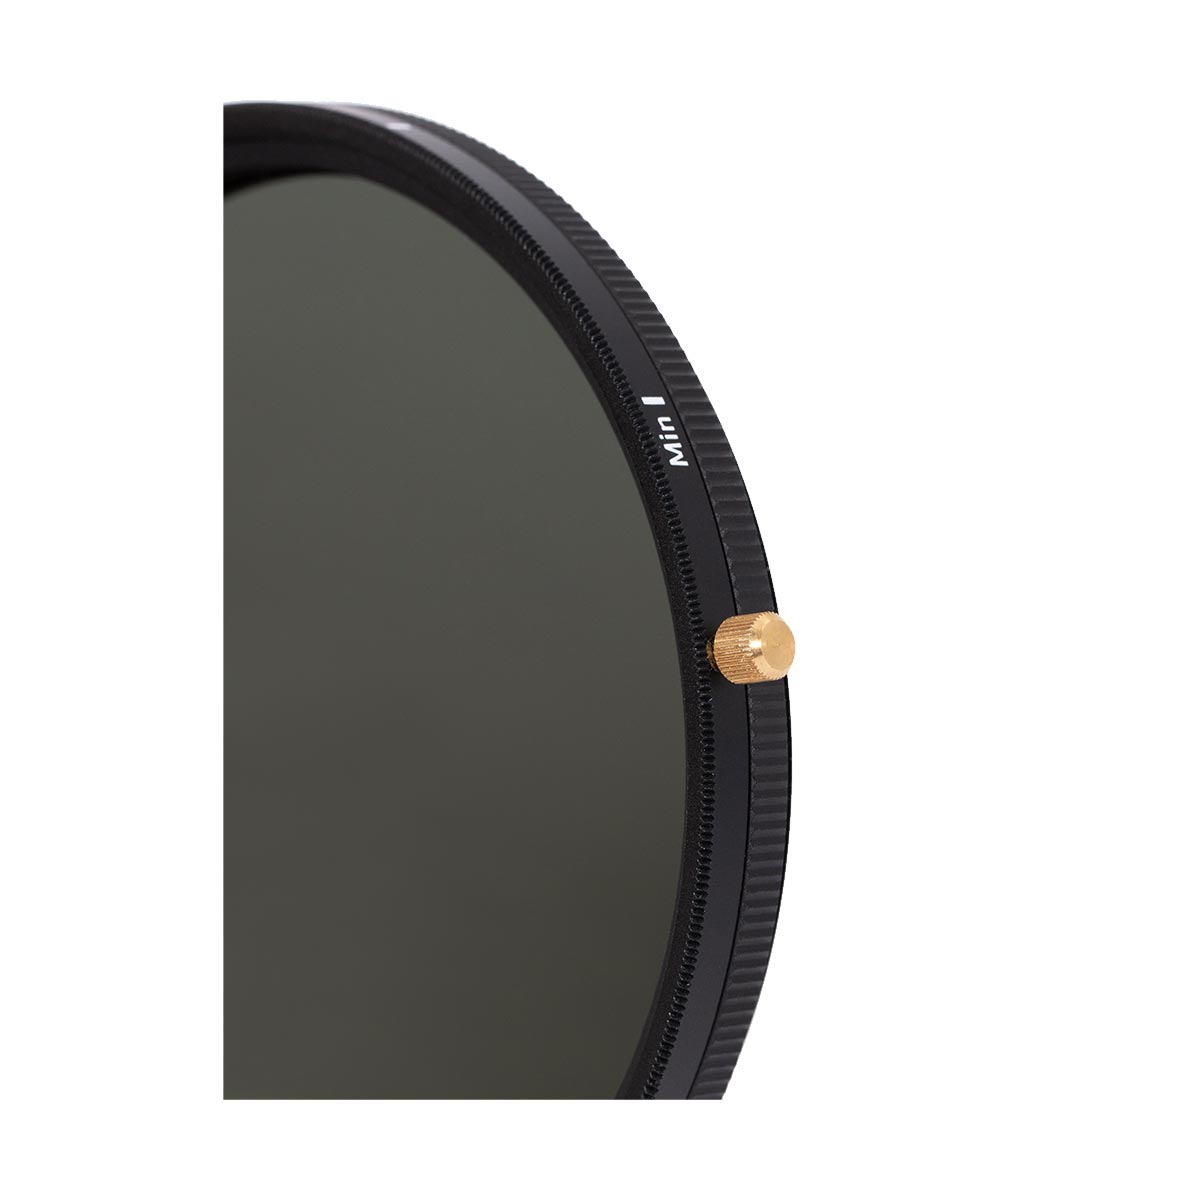 ProMaster HGX Prime 67mm Variable ND Filter (1.3 - 8 stops)